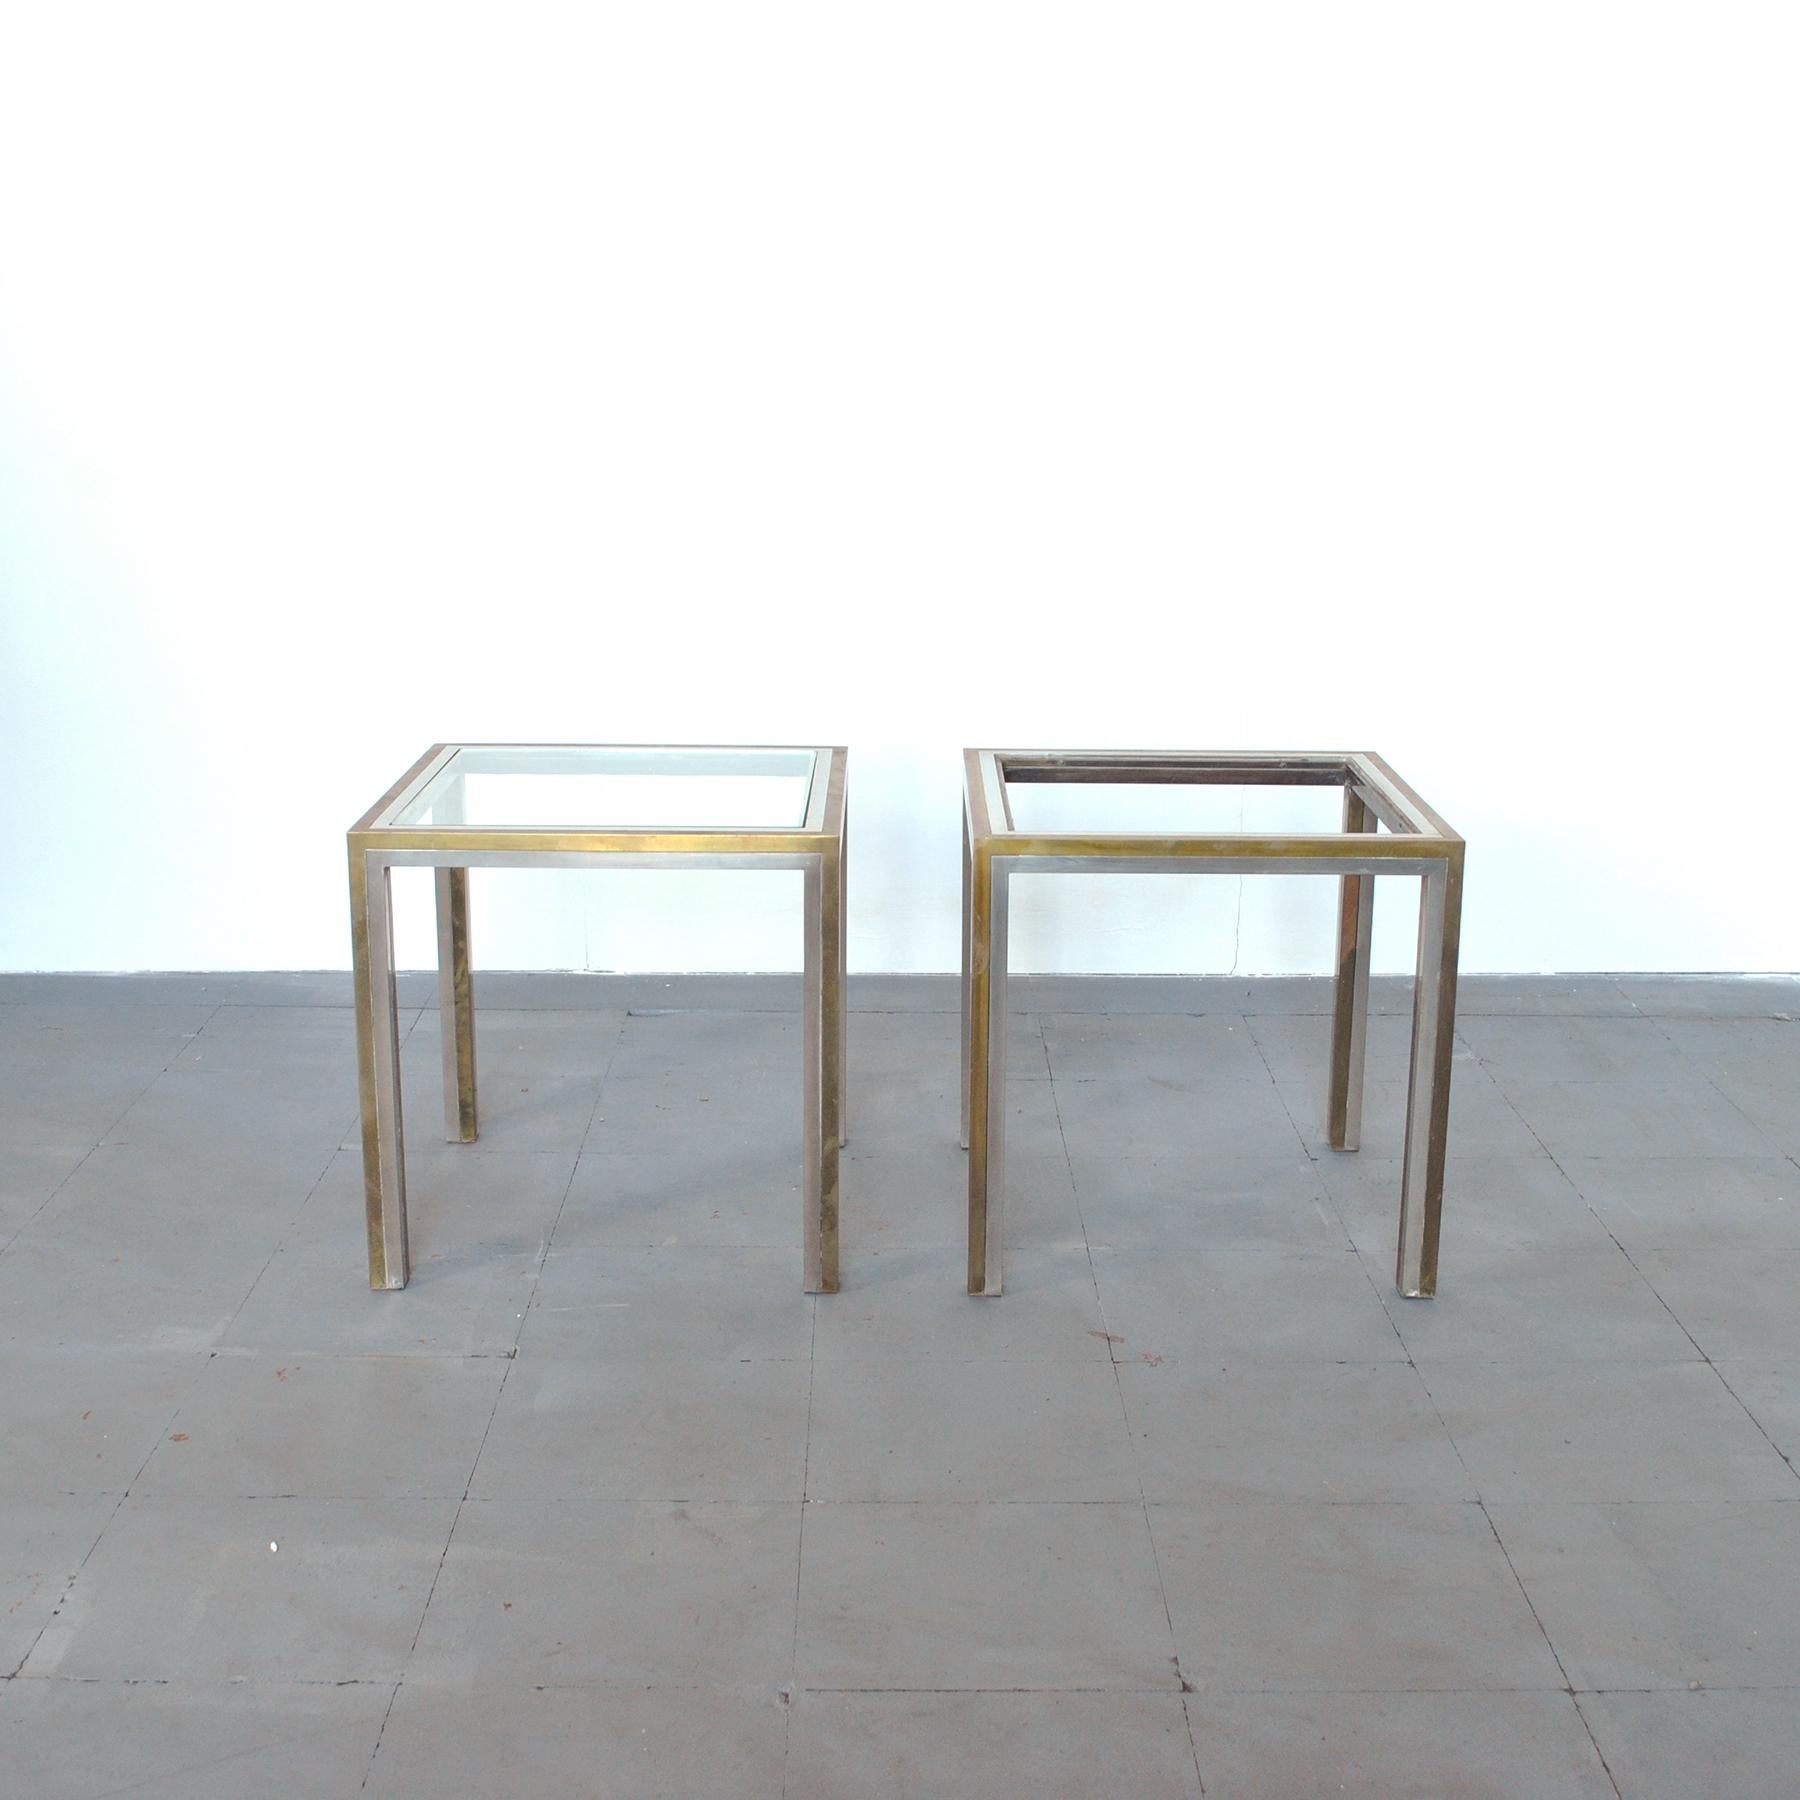 Set of two little coffee table in brass and stainless by Romeo Rega form mid-1970s.